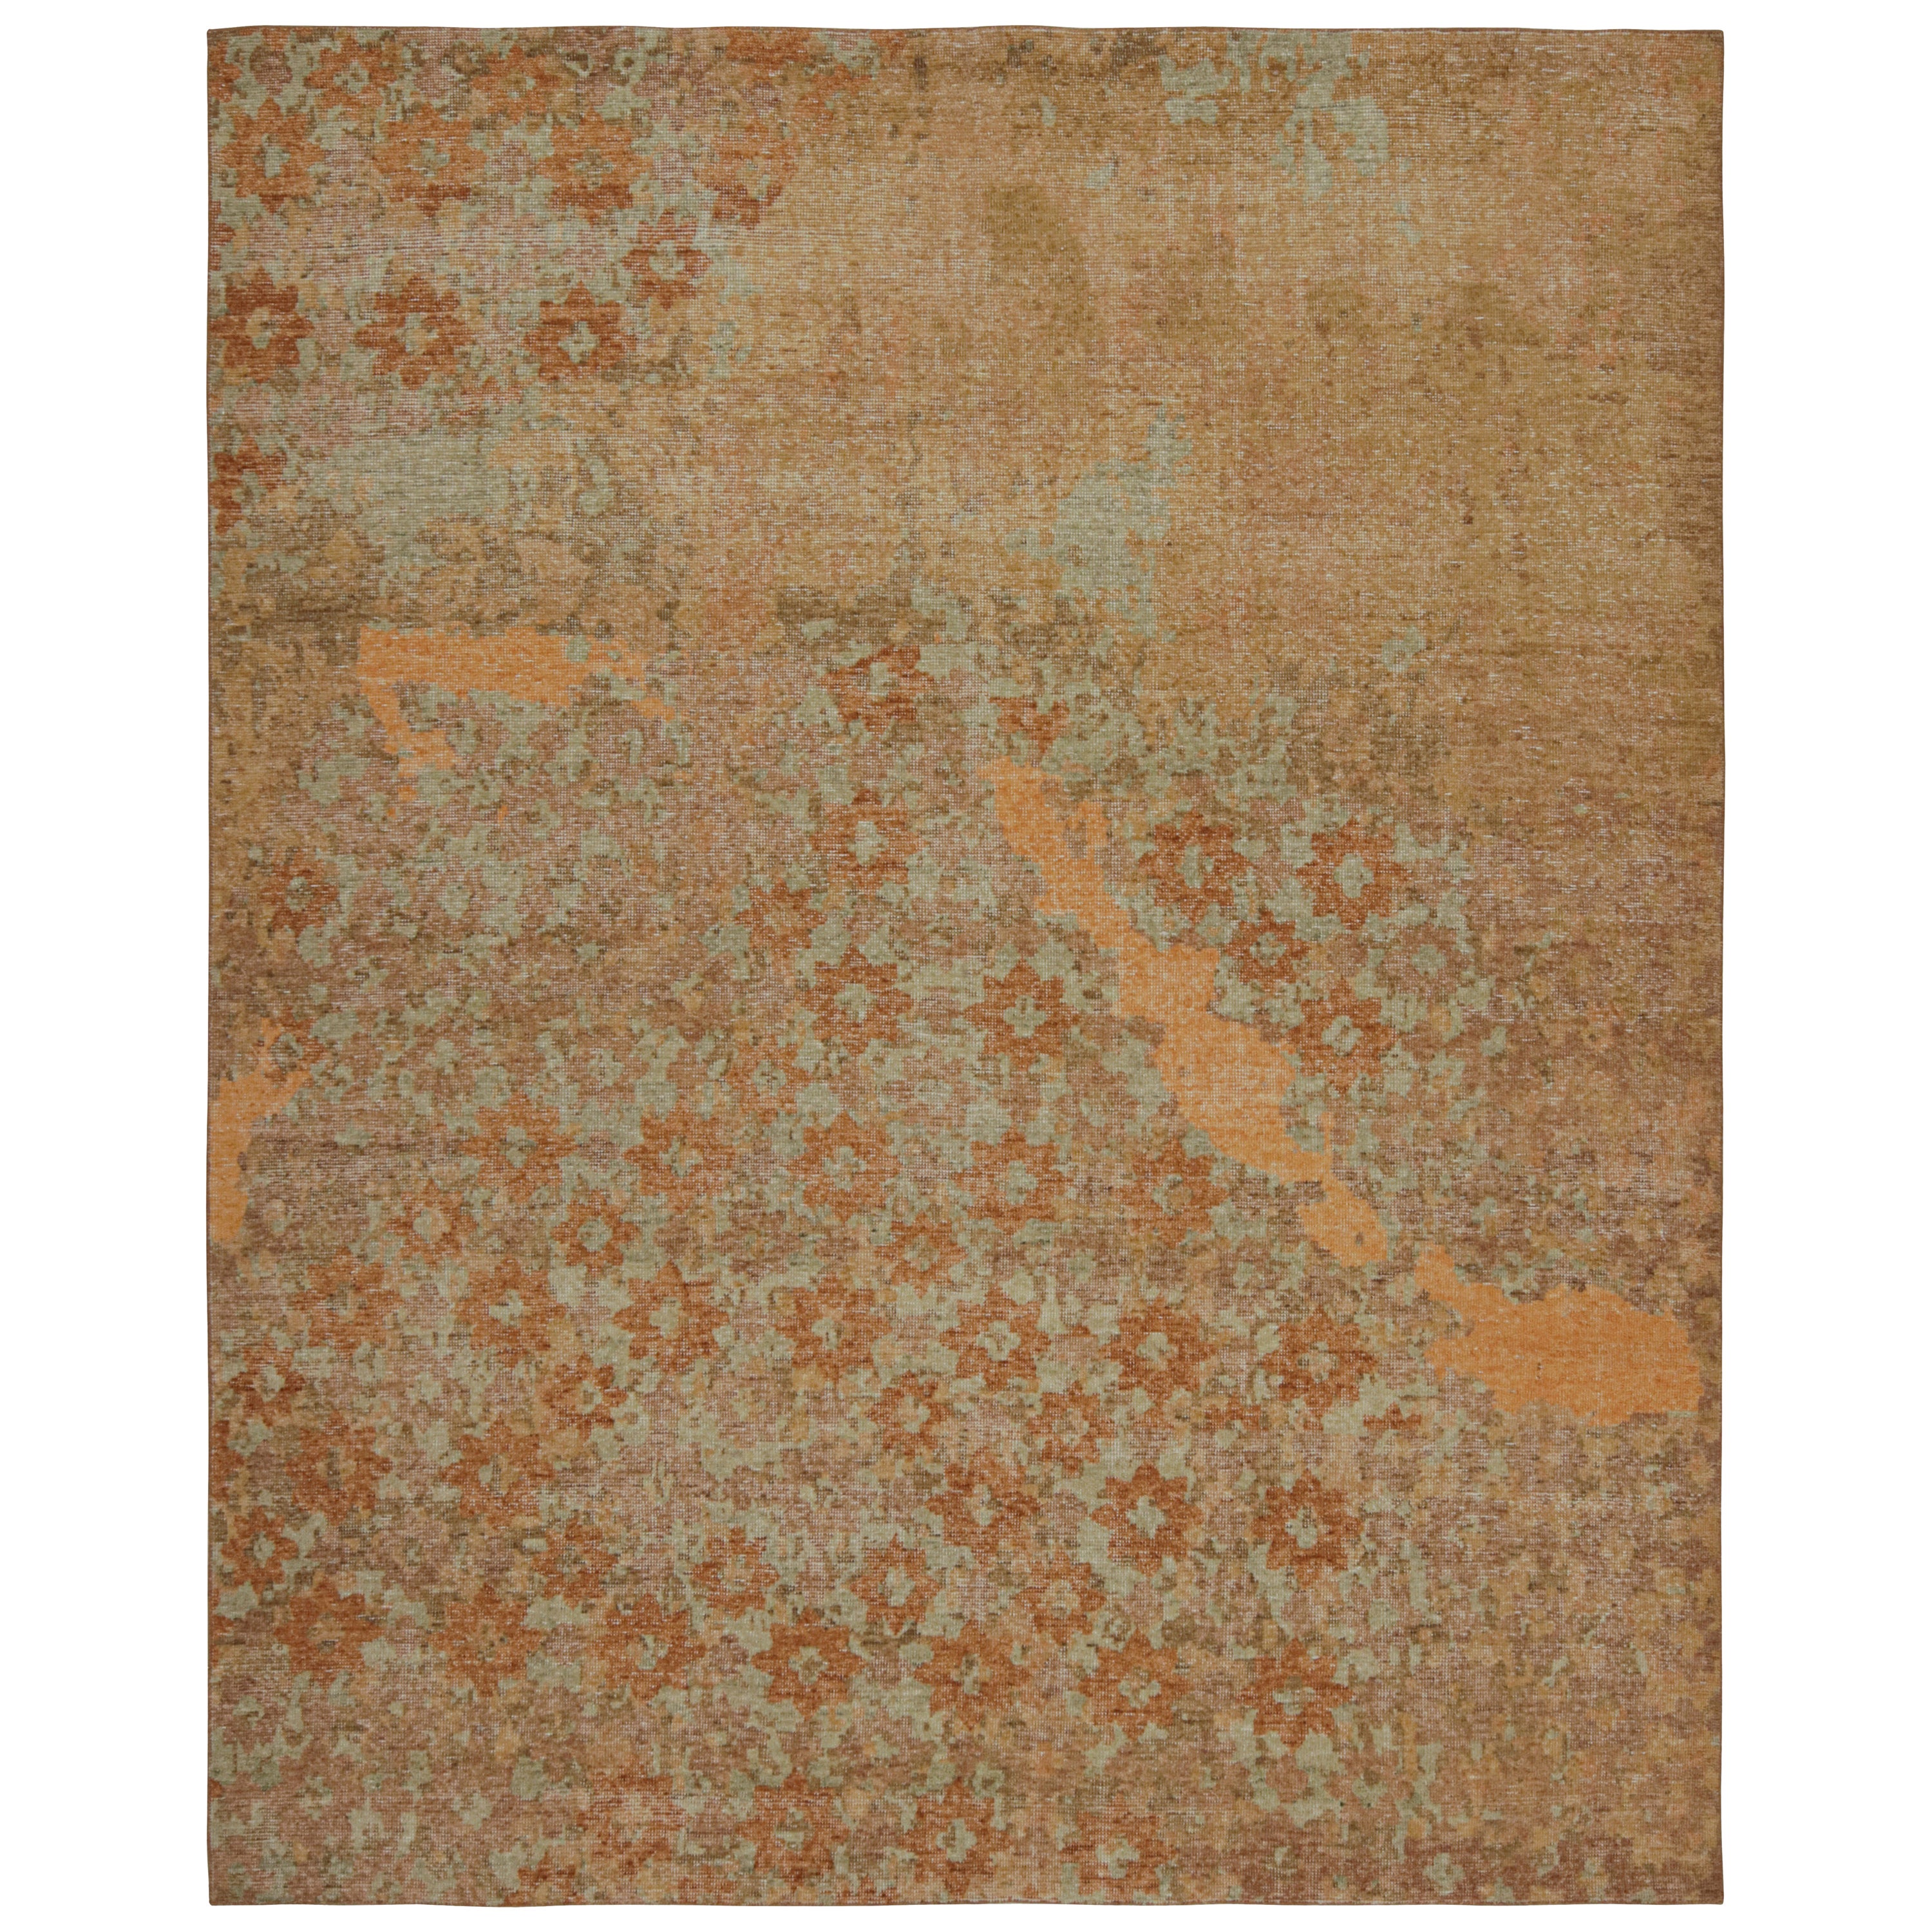 Rug & Kilim’s Modern Abstract Art Rug in Gold and Brown, with Floral Patterns For Sale